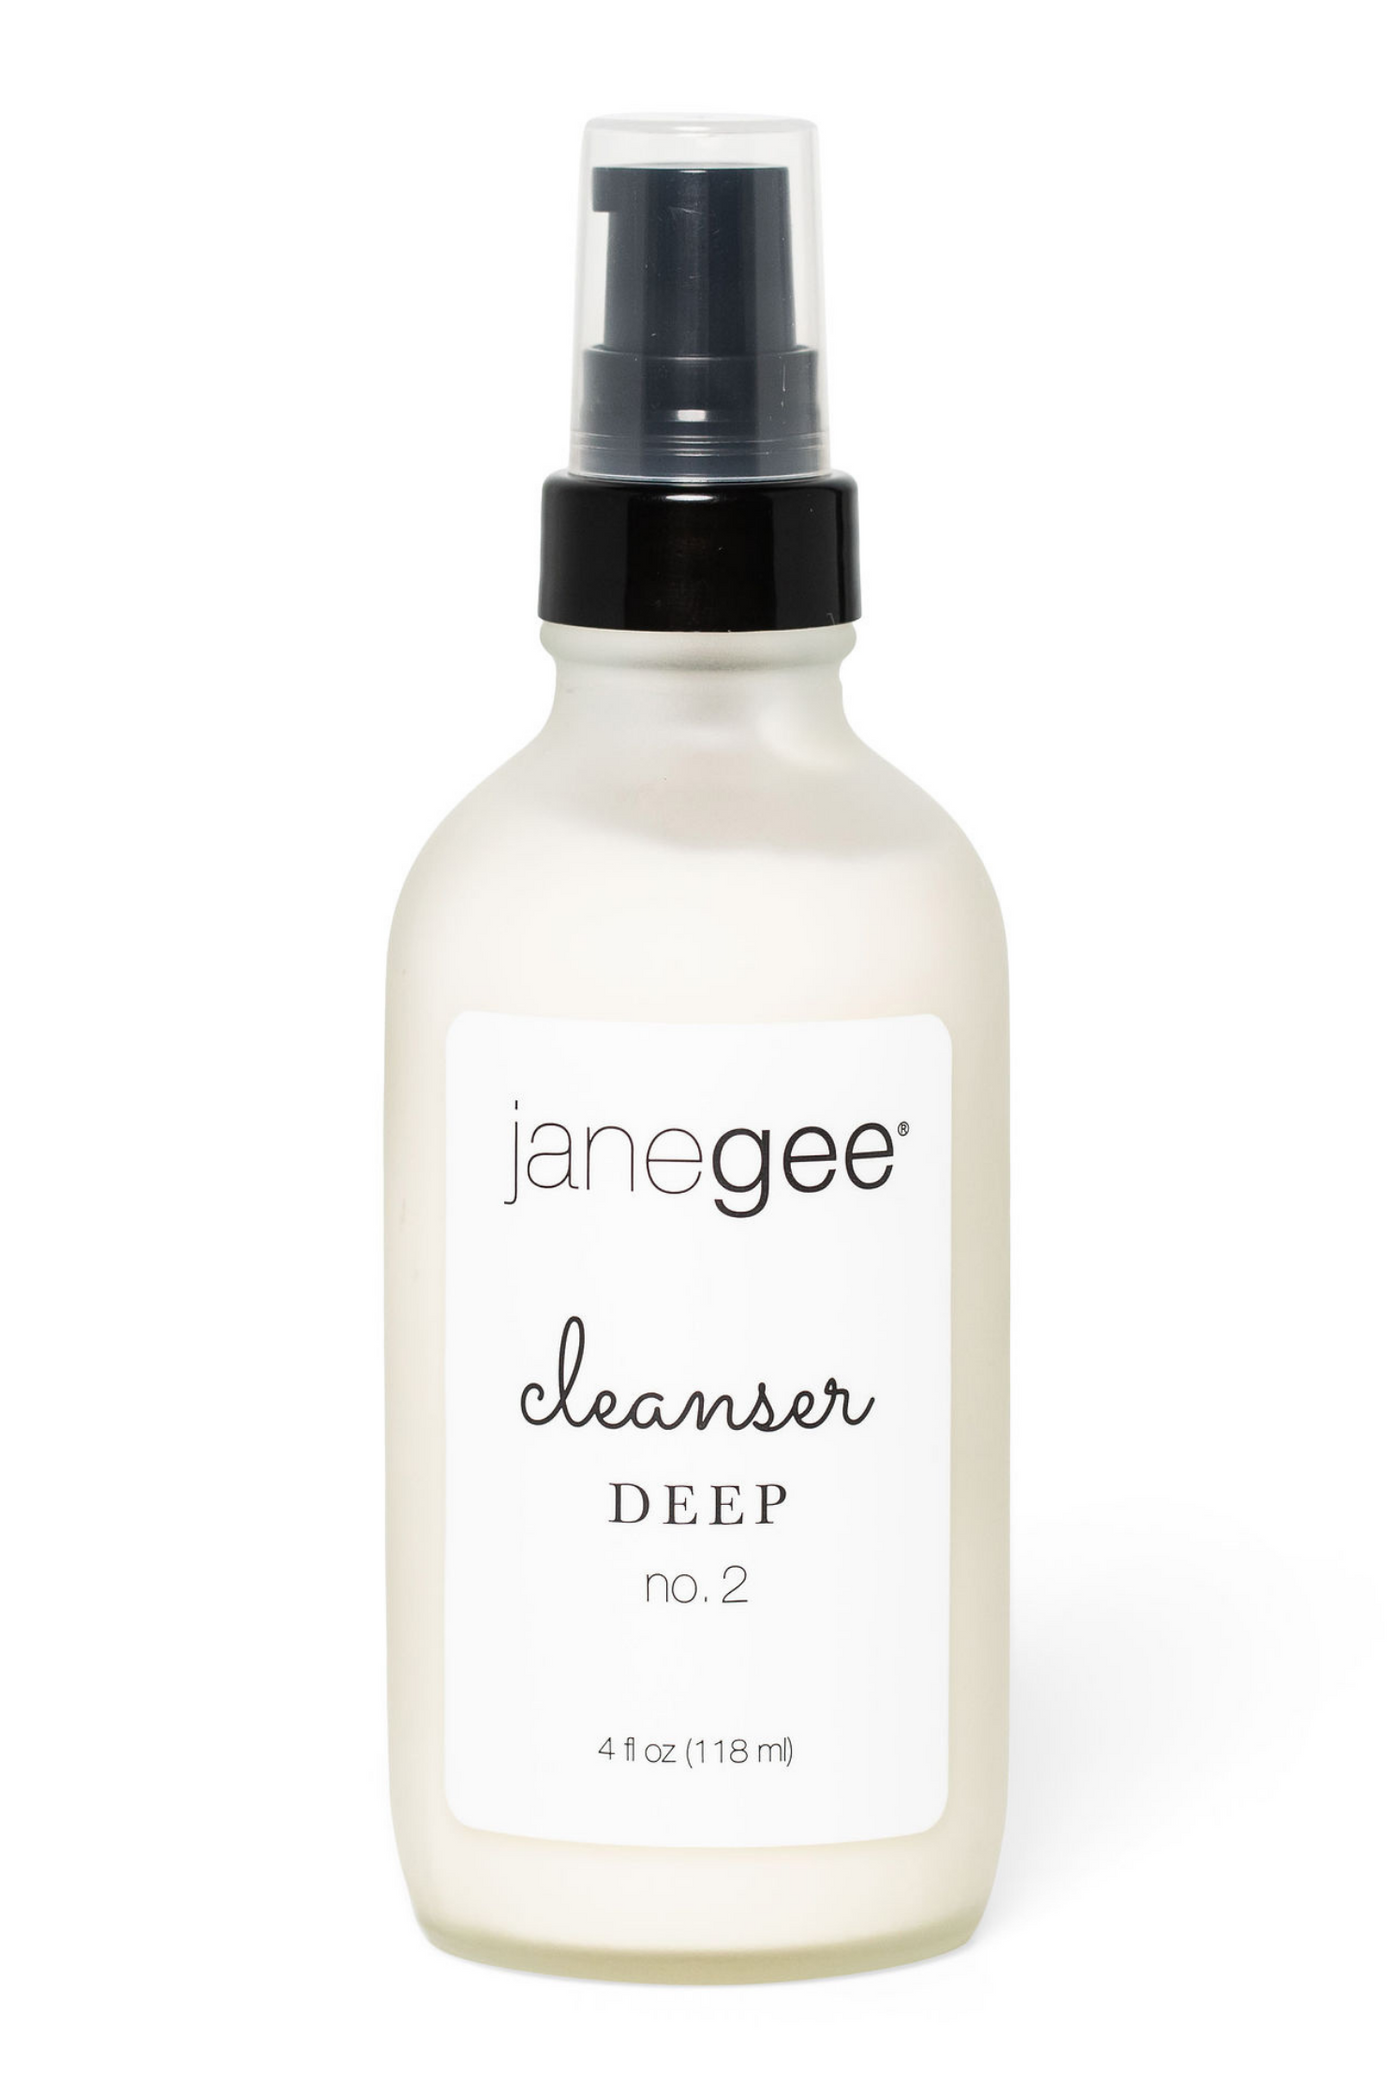 janegee Deep Cleanser No.2